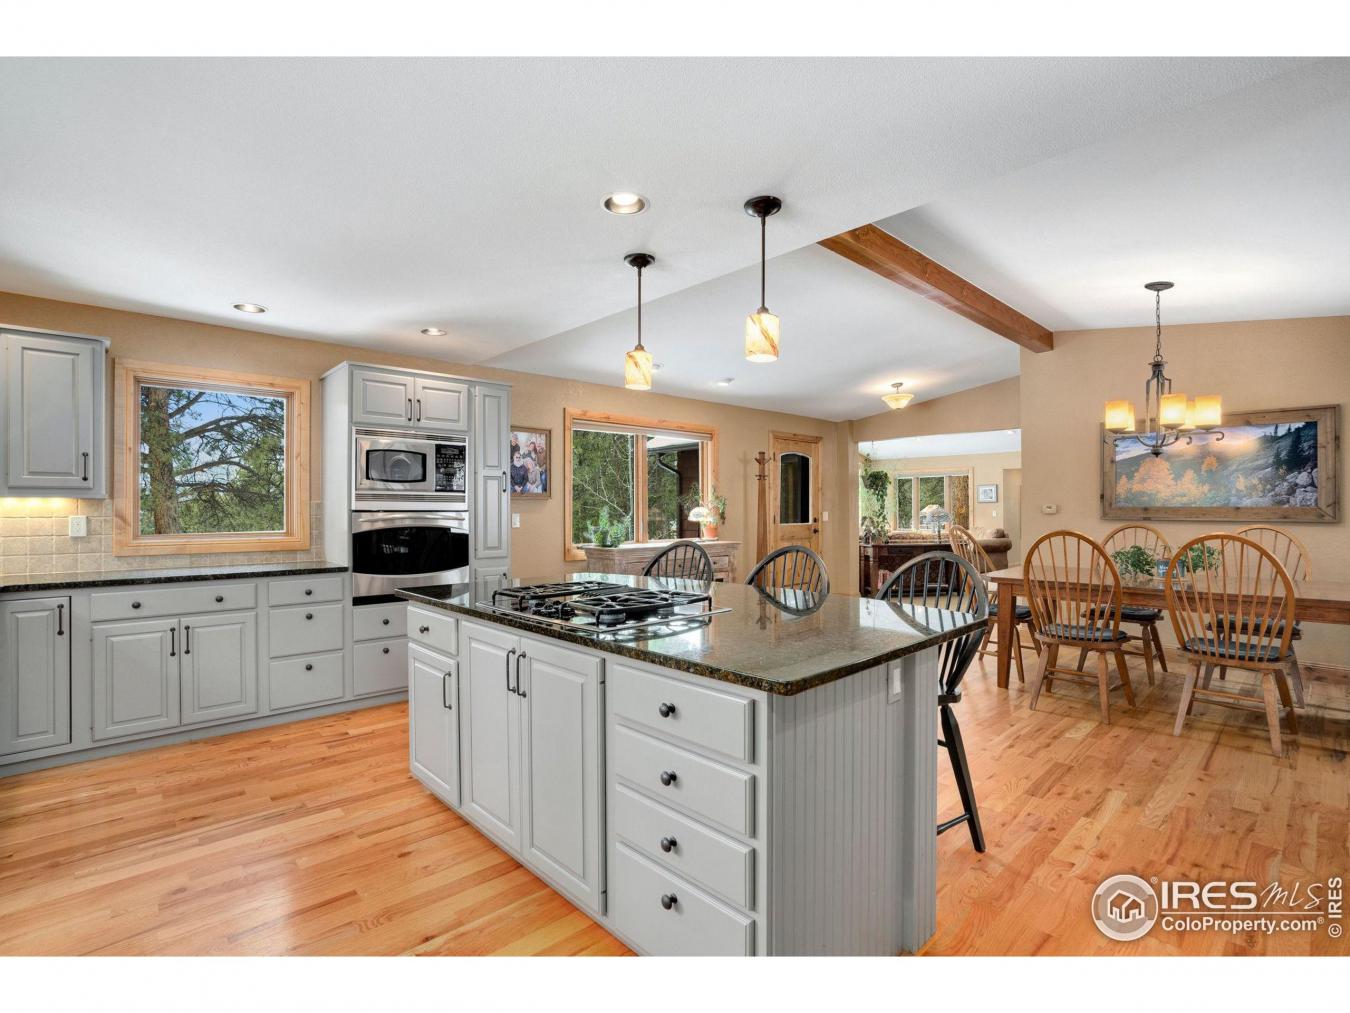 850 East Lane, Estes Park, Colorado, 80517, United States, 4 Bedrooms Bedrooms, ,1 BathroomBathrooms,Residential,For Sale,850 East Lane,1477870